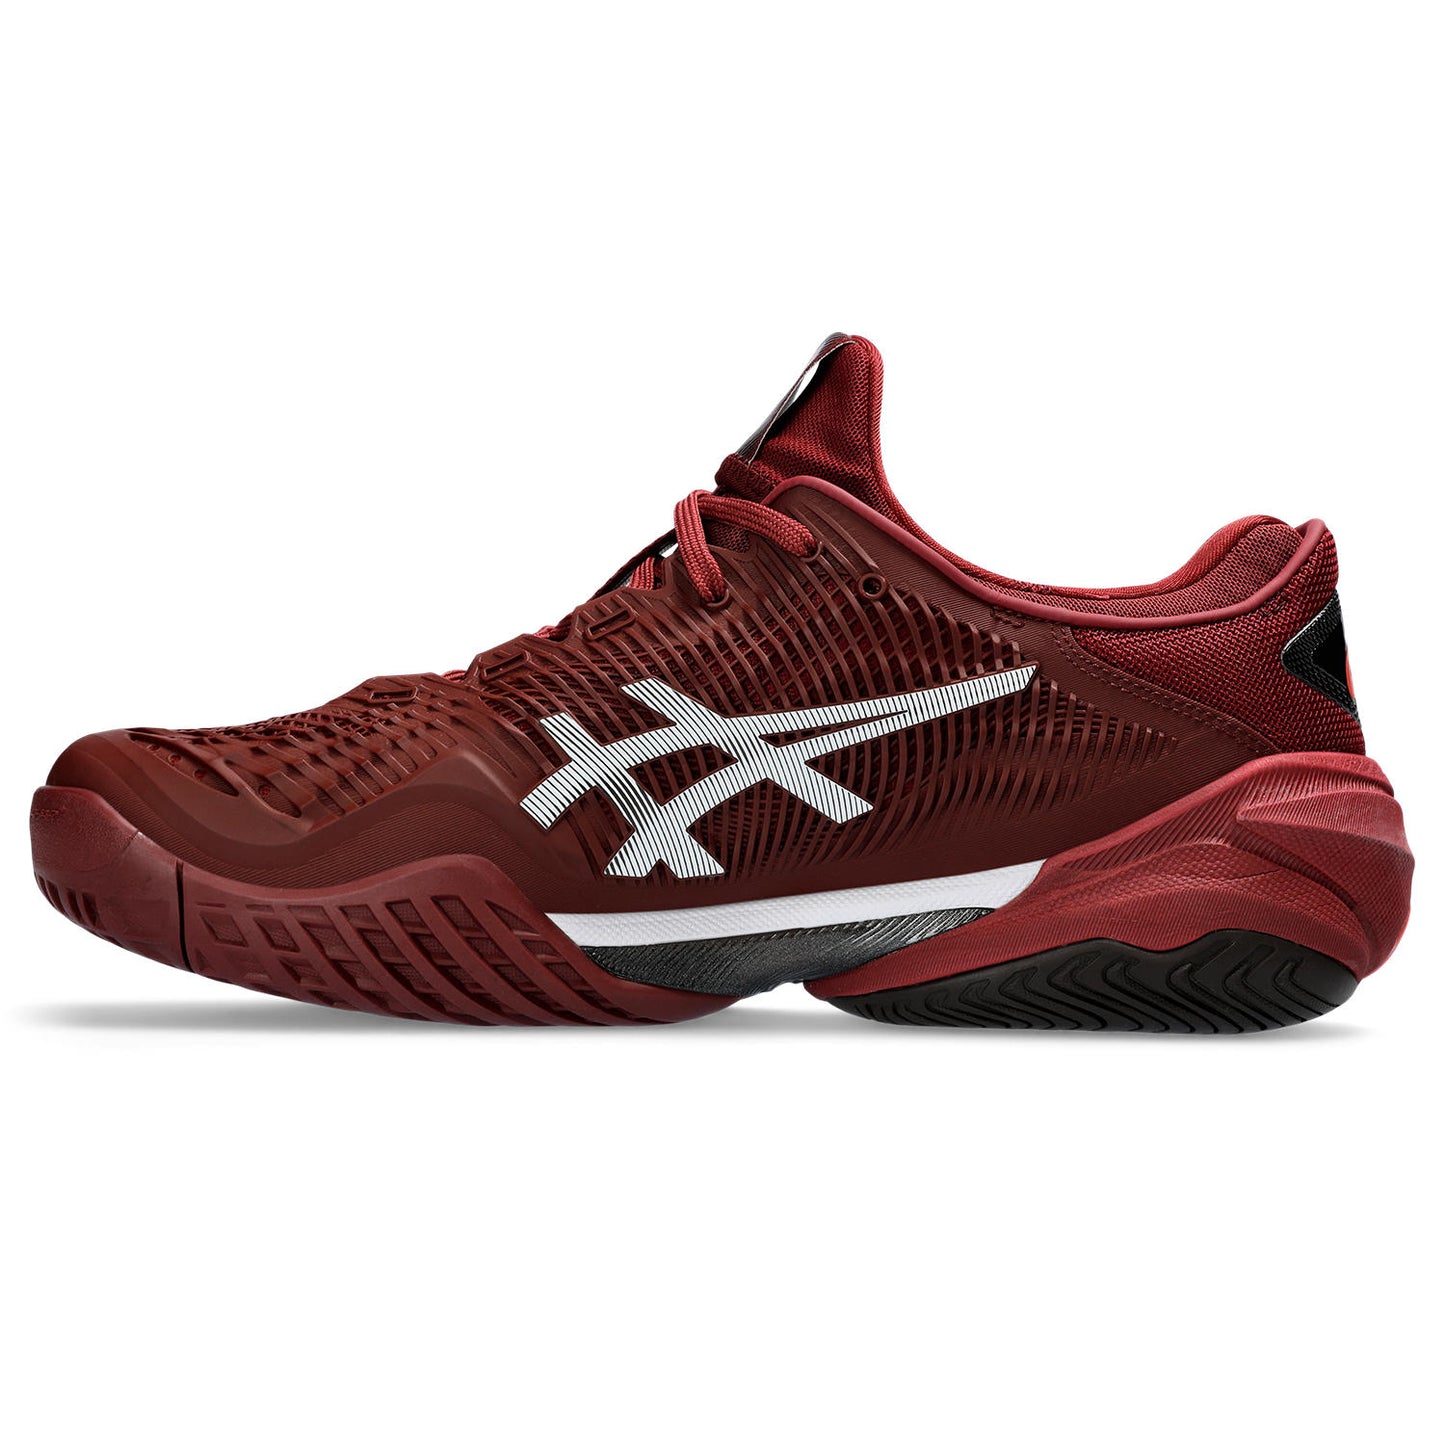 Asics Court FF 3 men's tennis shoes - Red/White 370.600